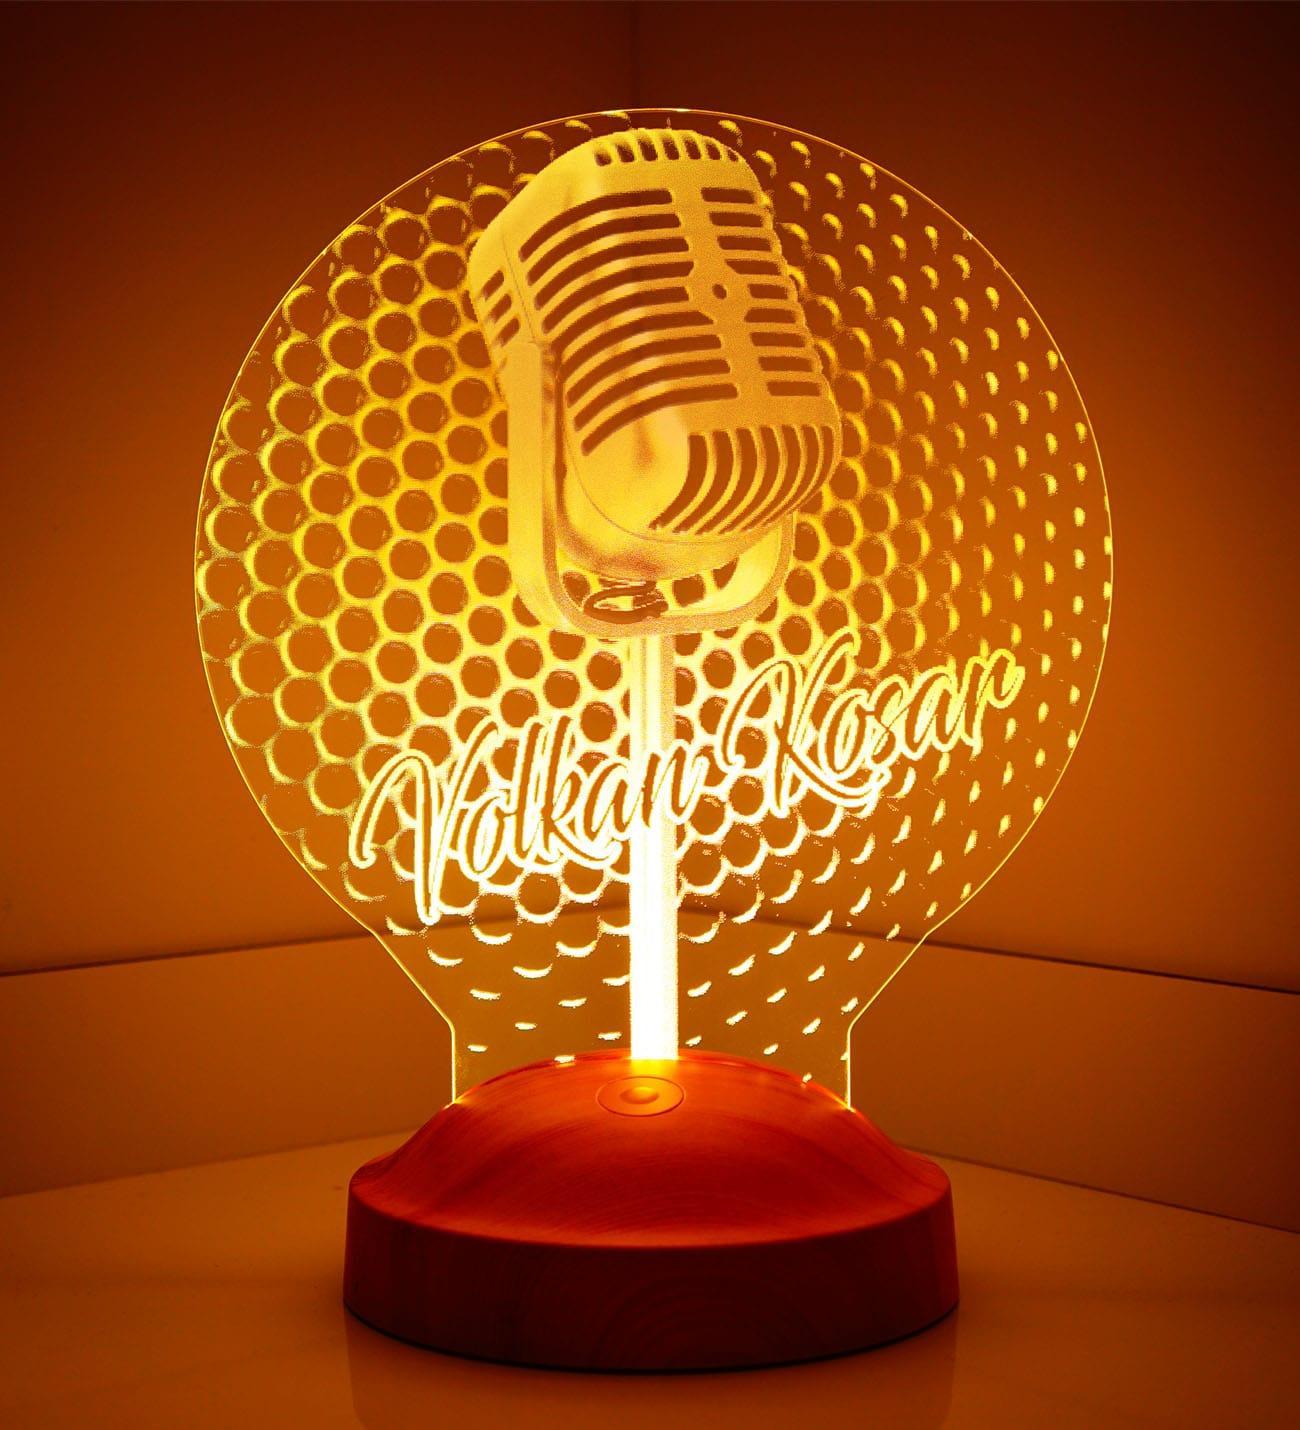 Microphone Personalized gifts Lamp with text of your choice